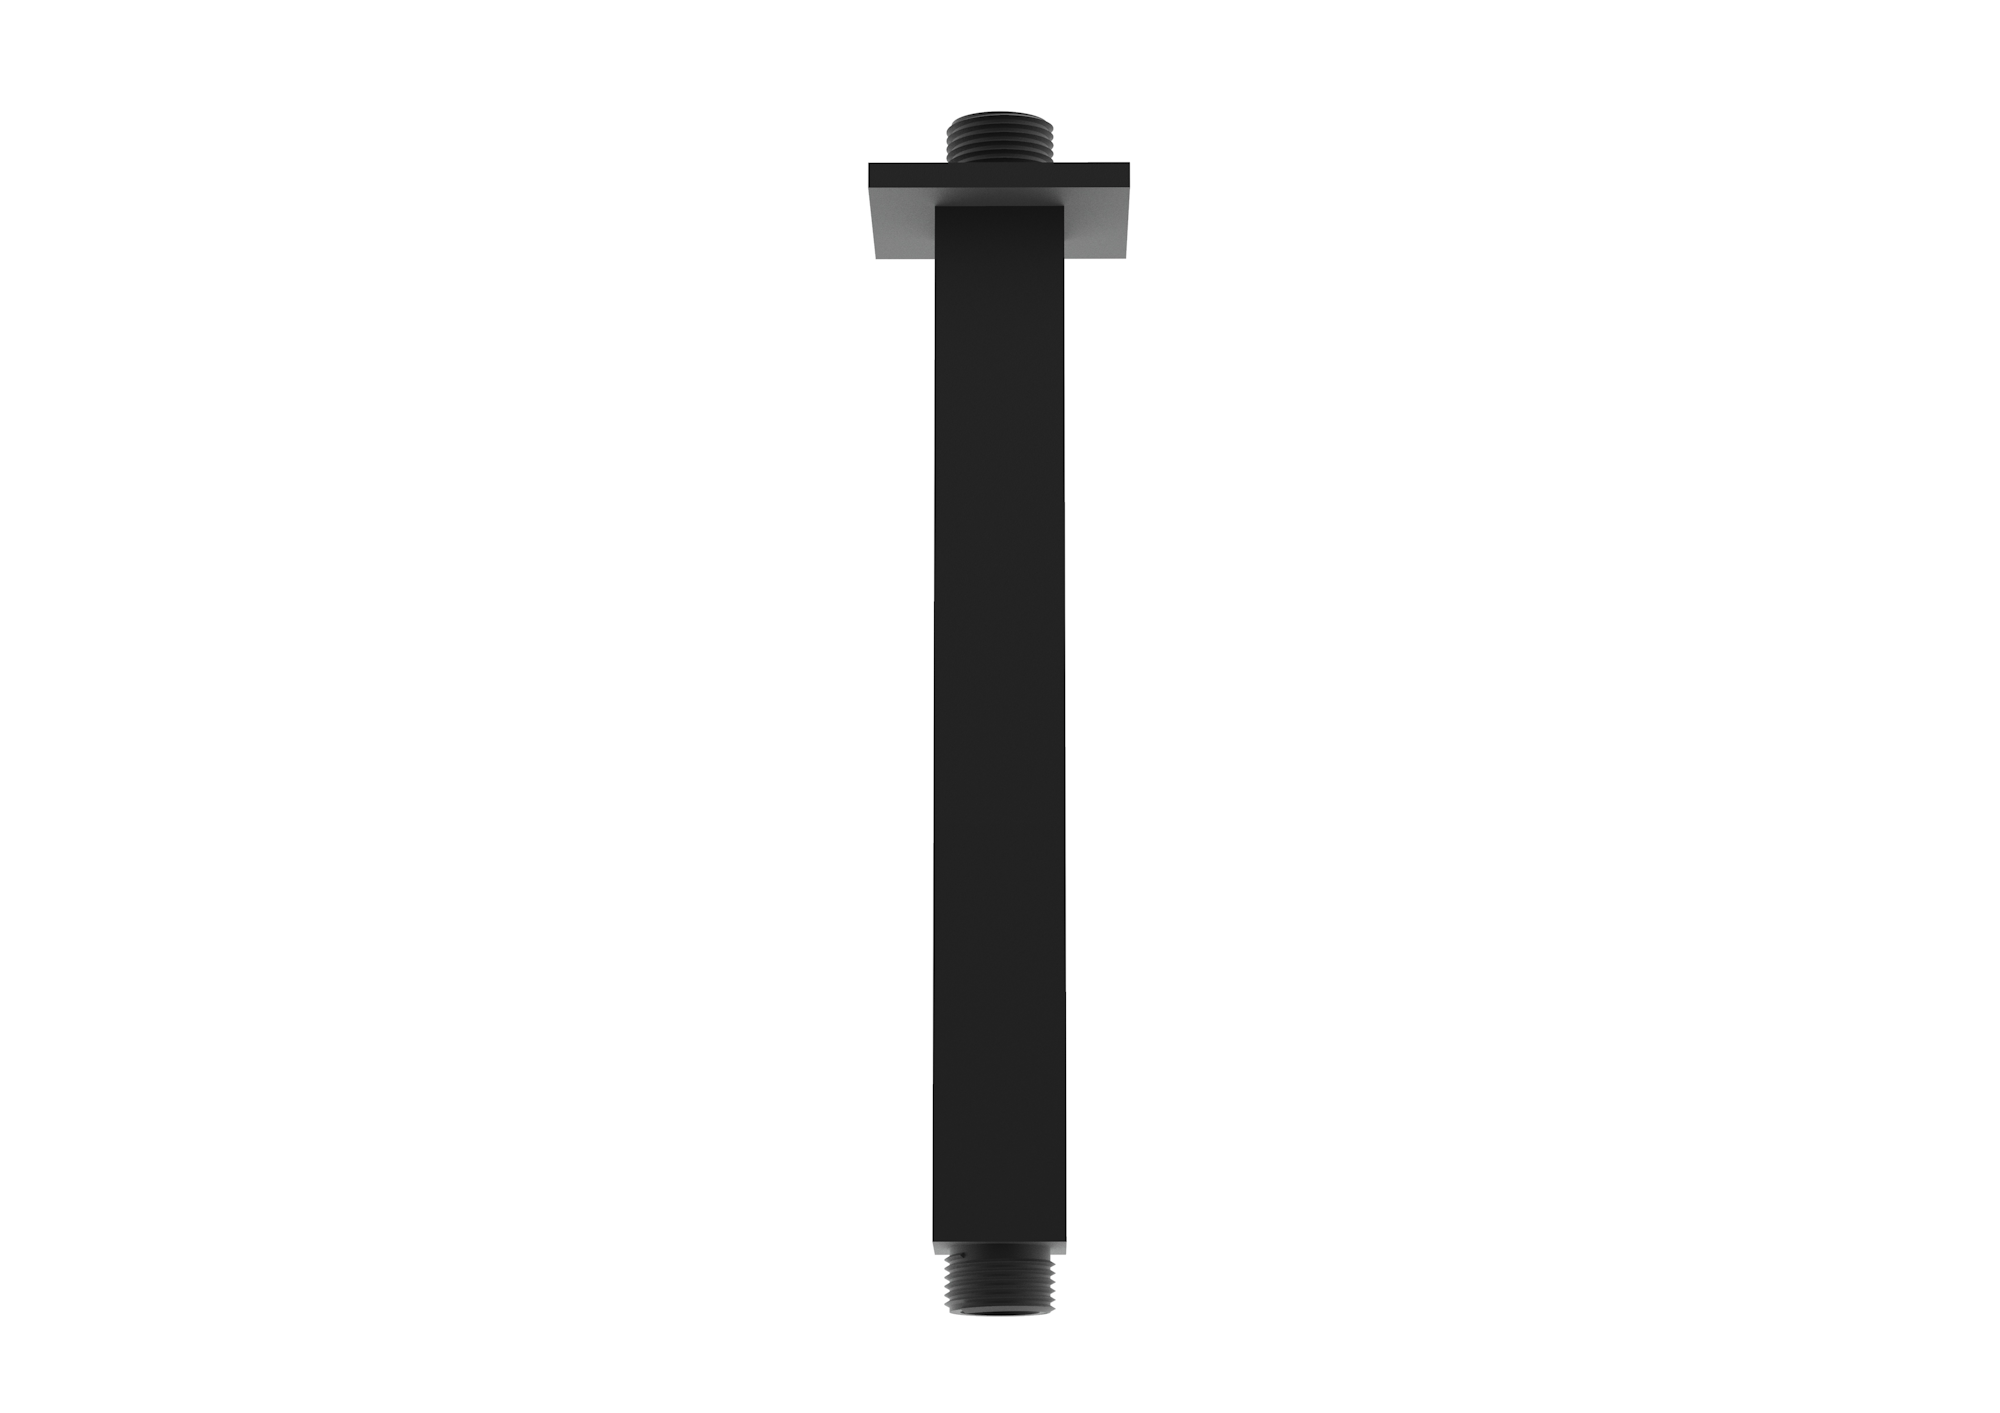 TOOGA 200mm square ceiling mounted shower arm - Matte Black